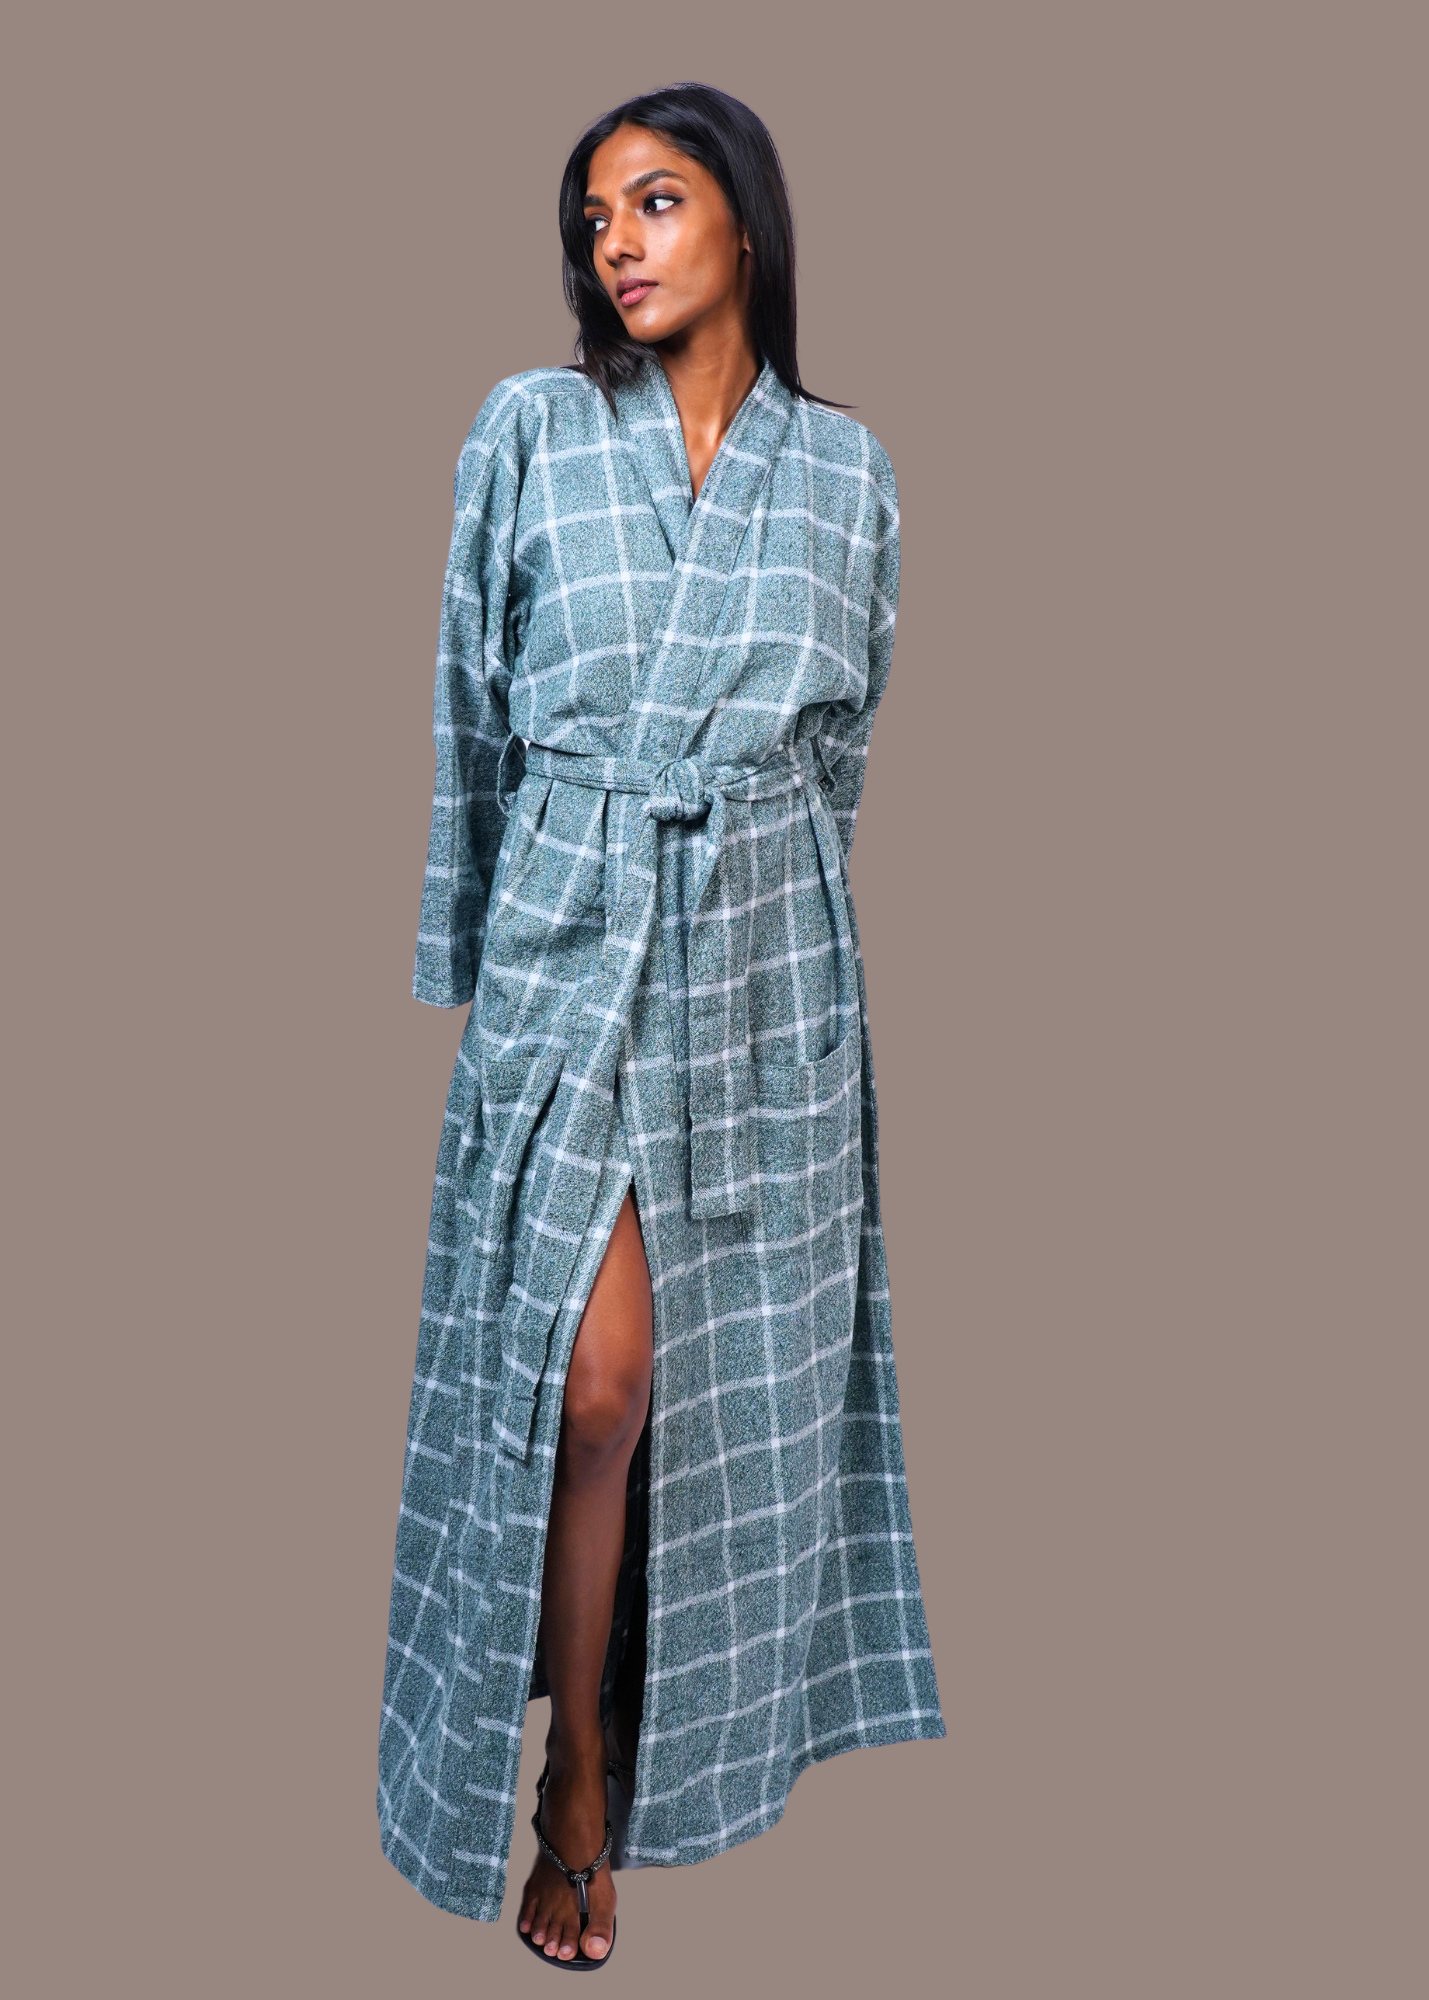 Robe - Warm Green Flannel, a product by Azurina